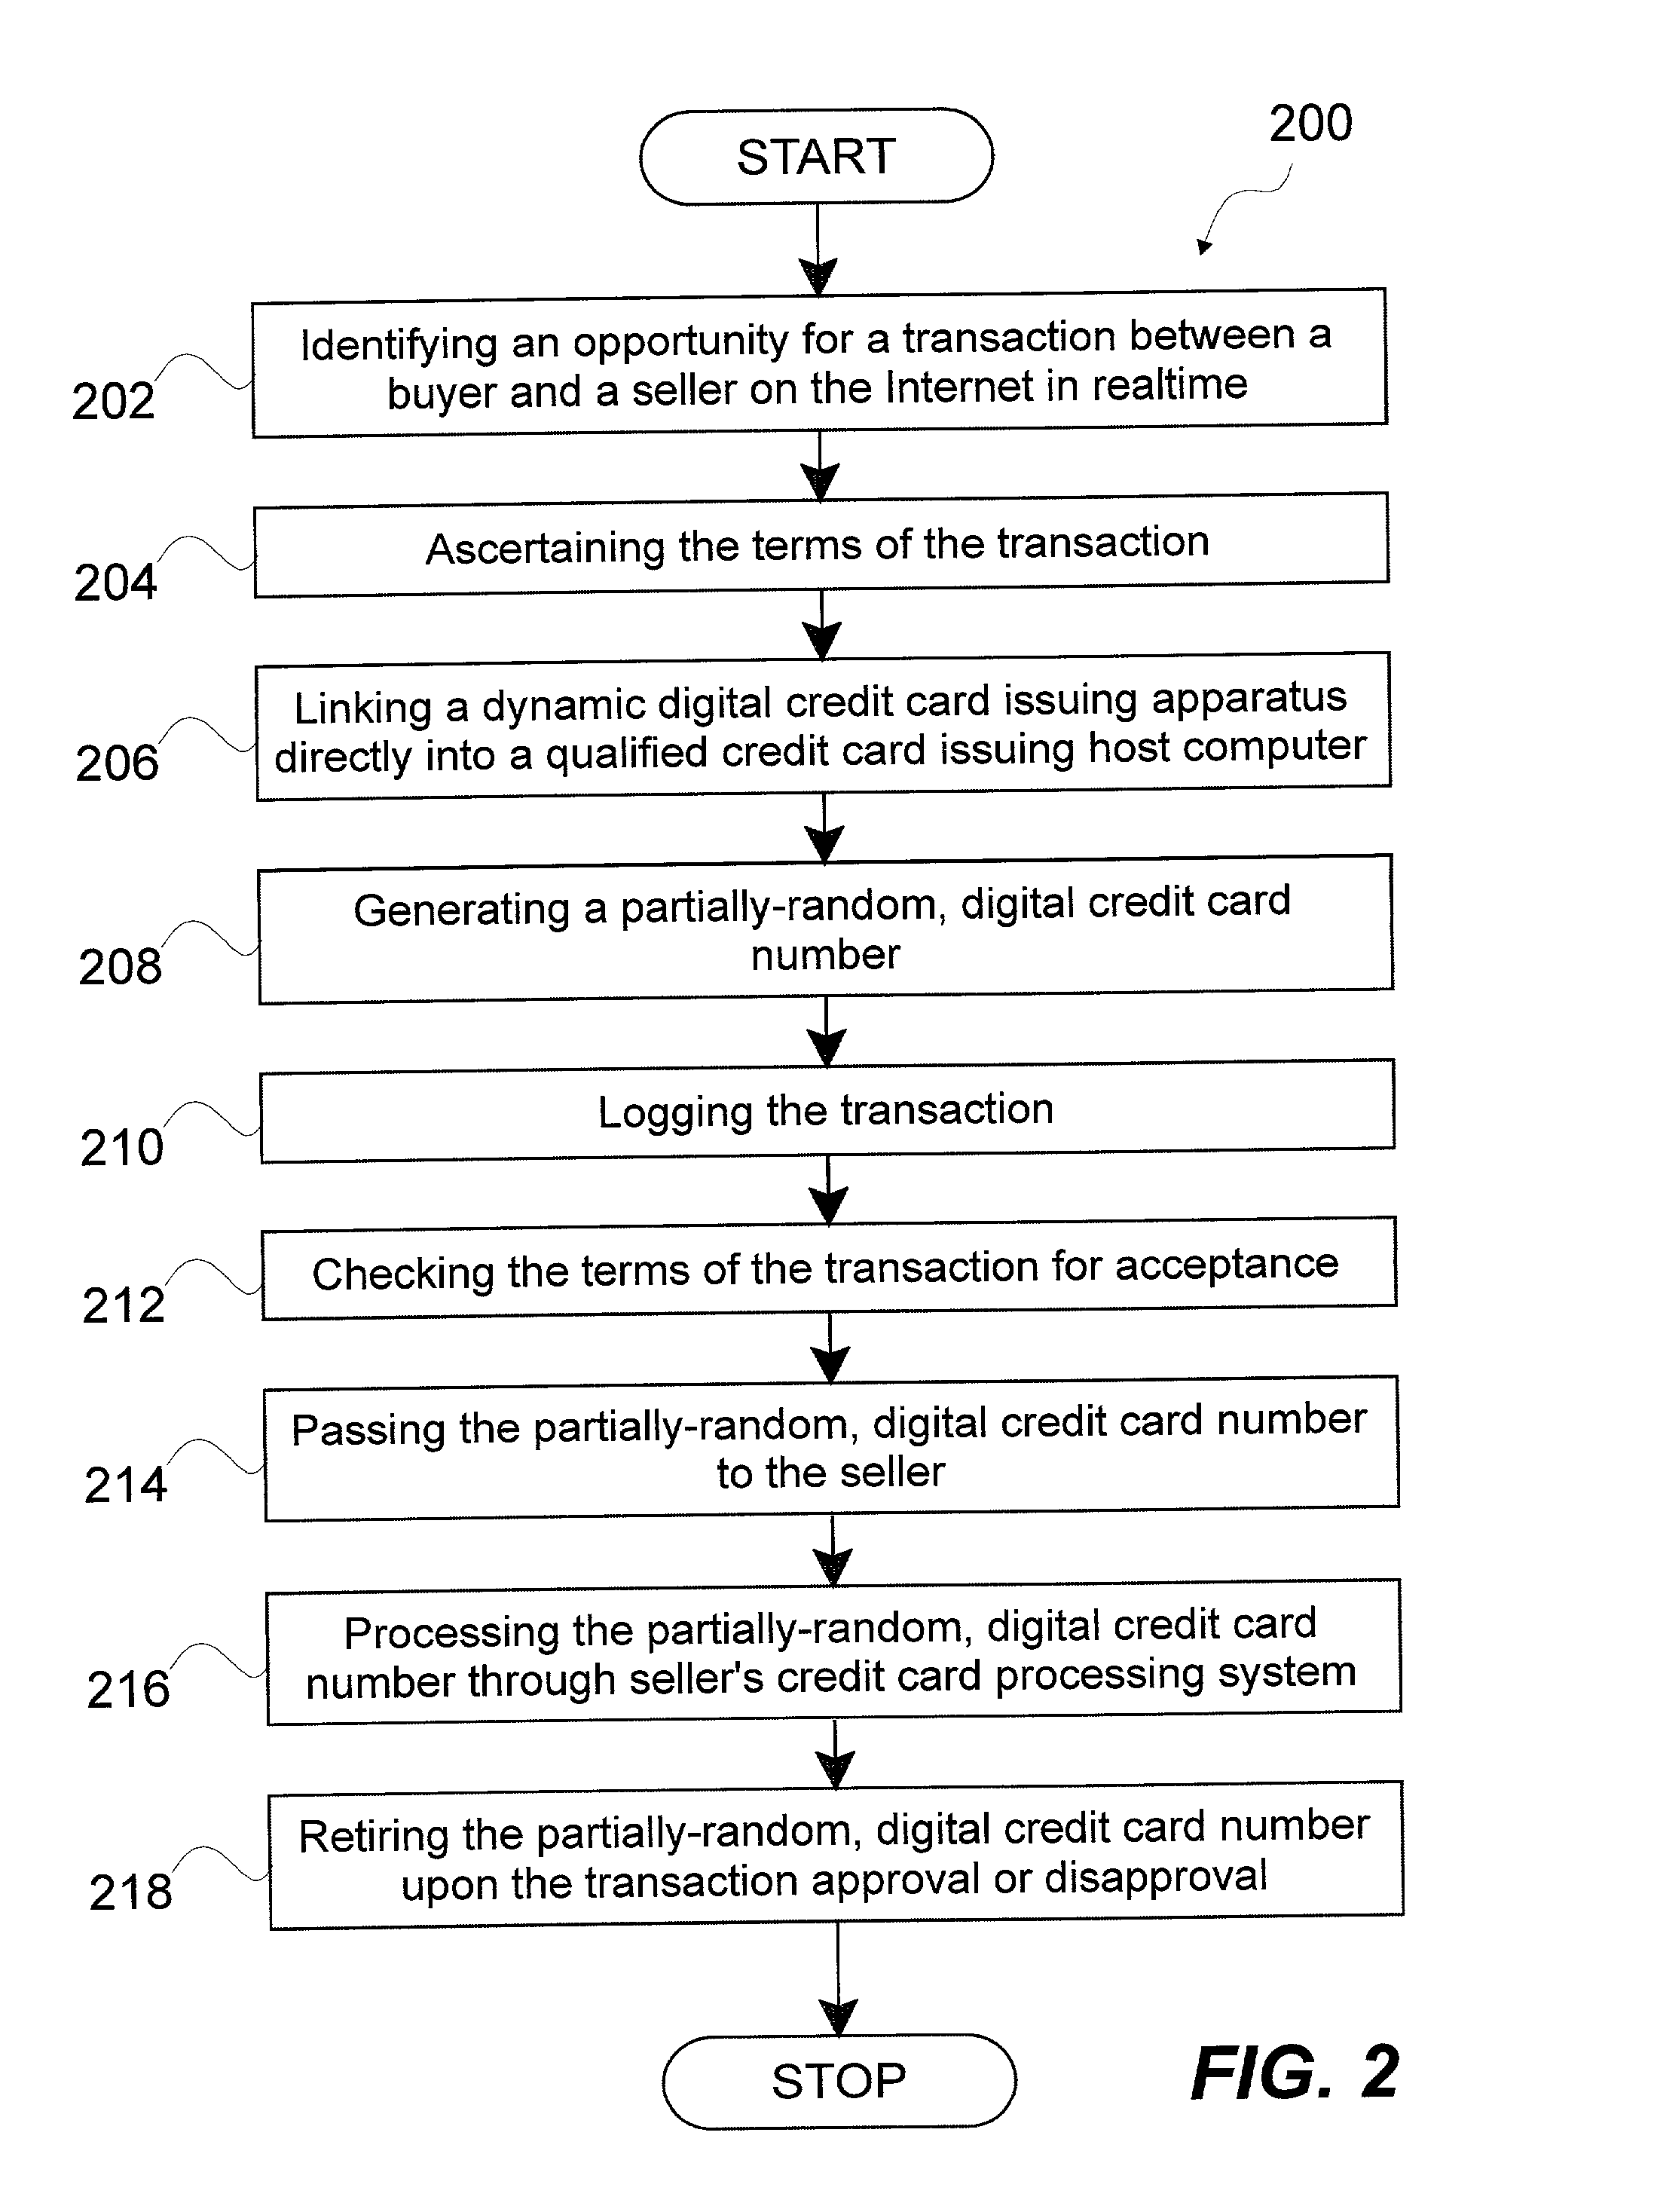 System and method for dynamically issuing and processing transaction specific digital credit or debit cards